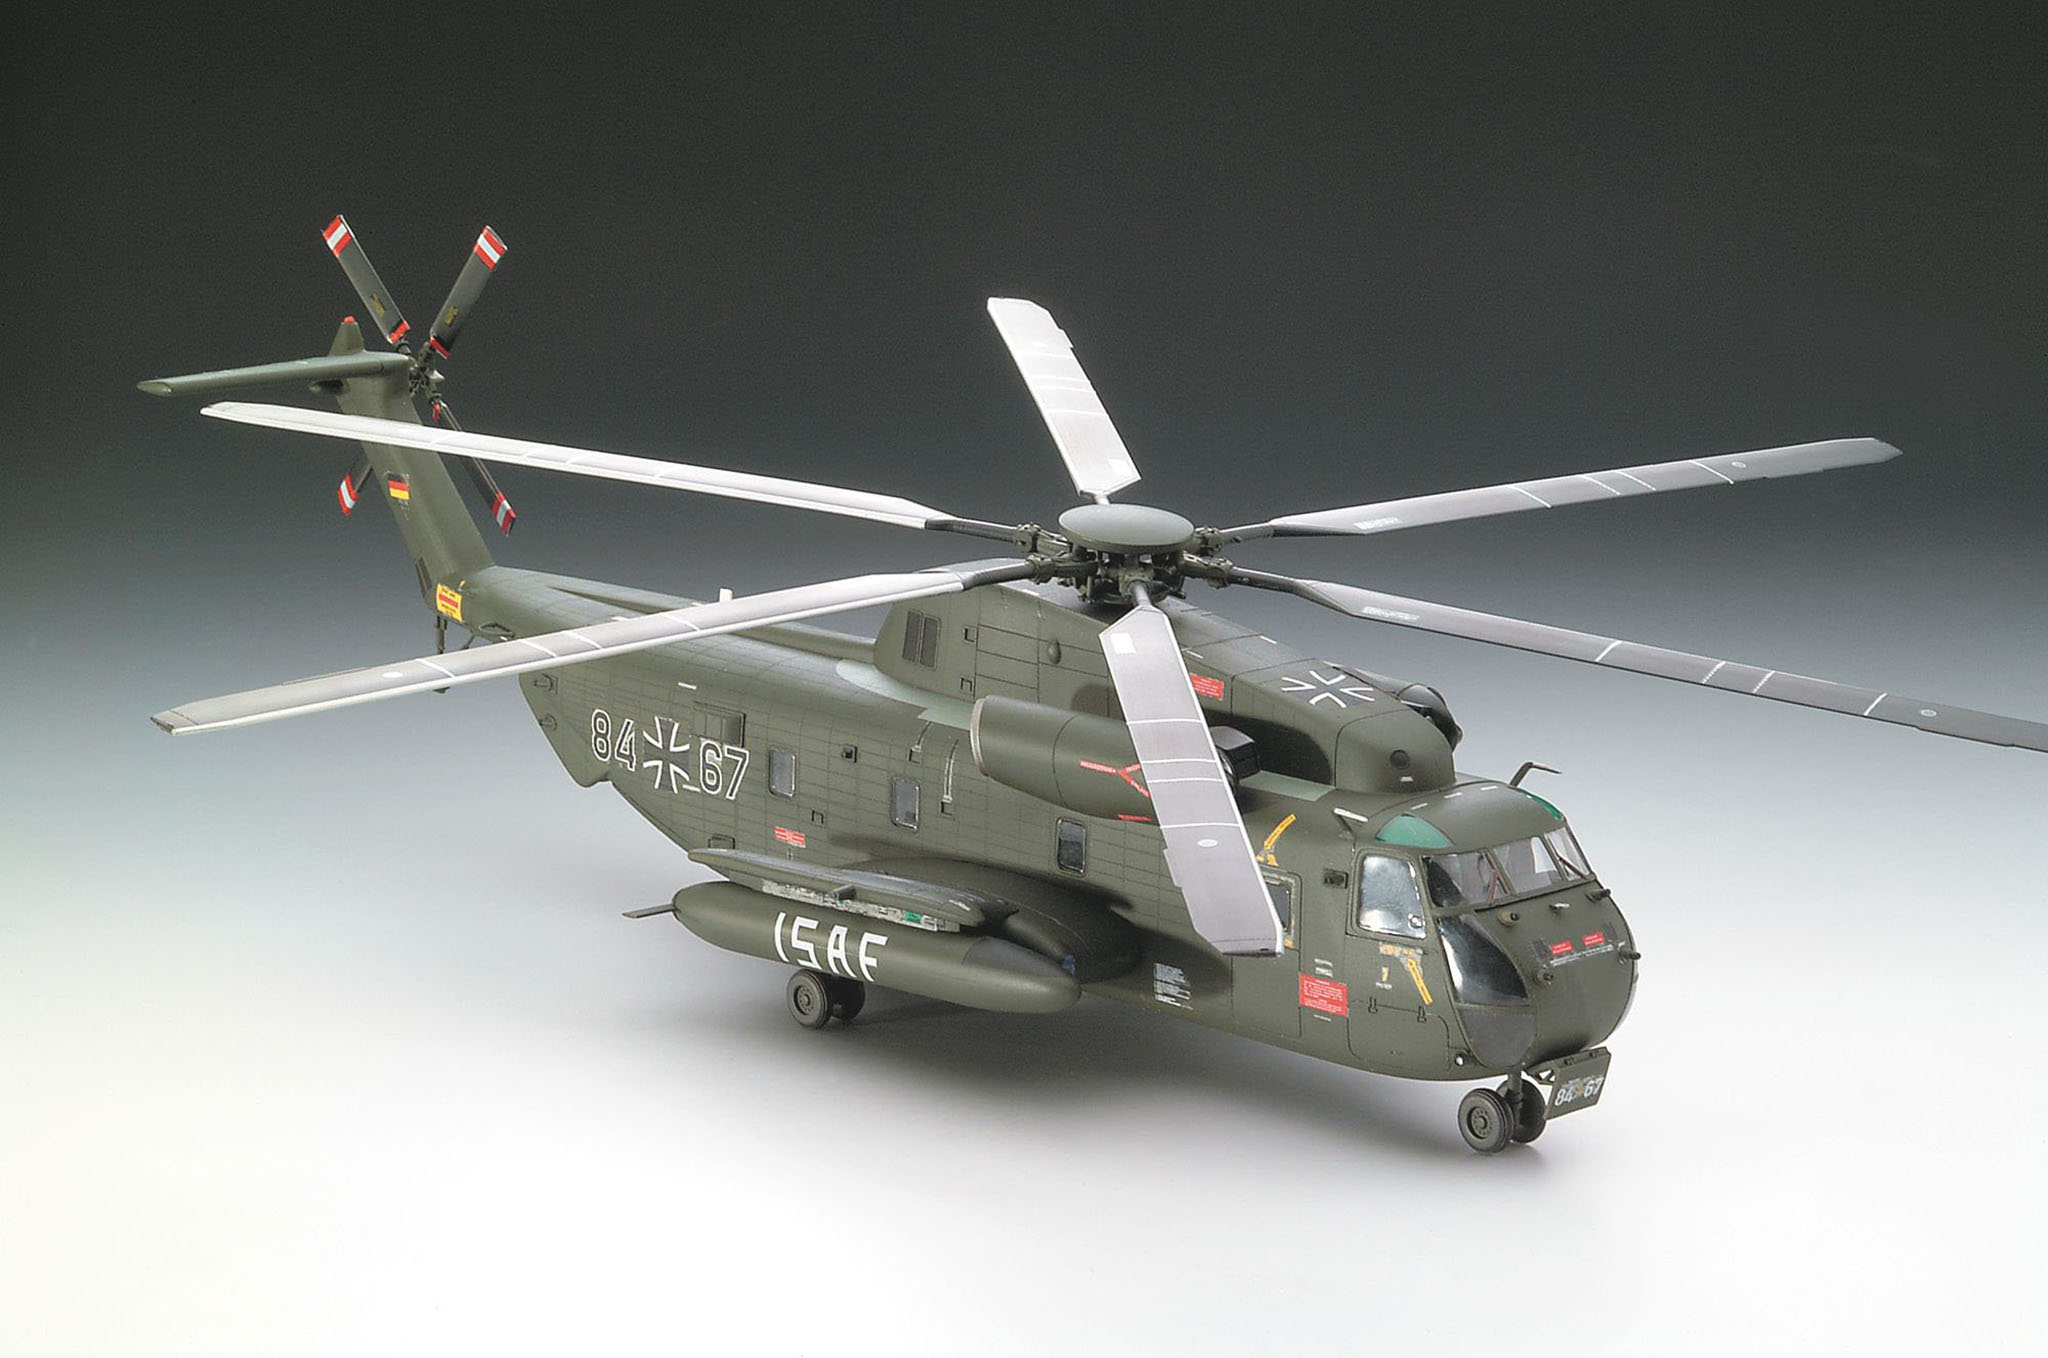 revell-03856-2-Sikorsky-CH-53-GS-G-Bundeswehr-Transporthubschrauber-heavy-lift-best-helicopter